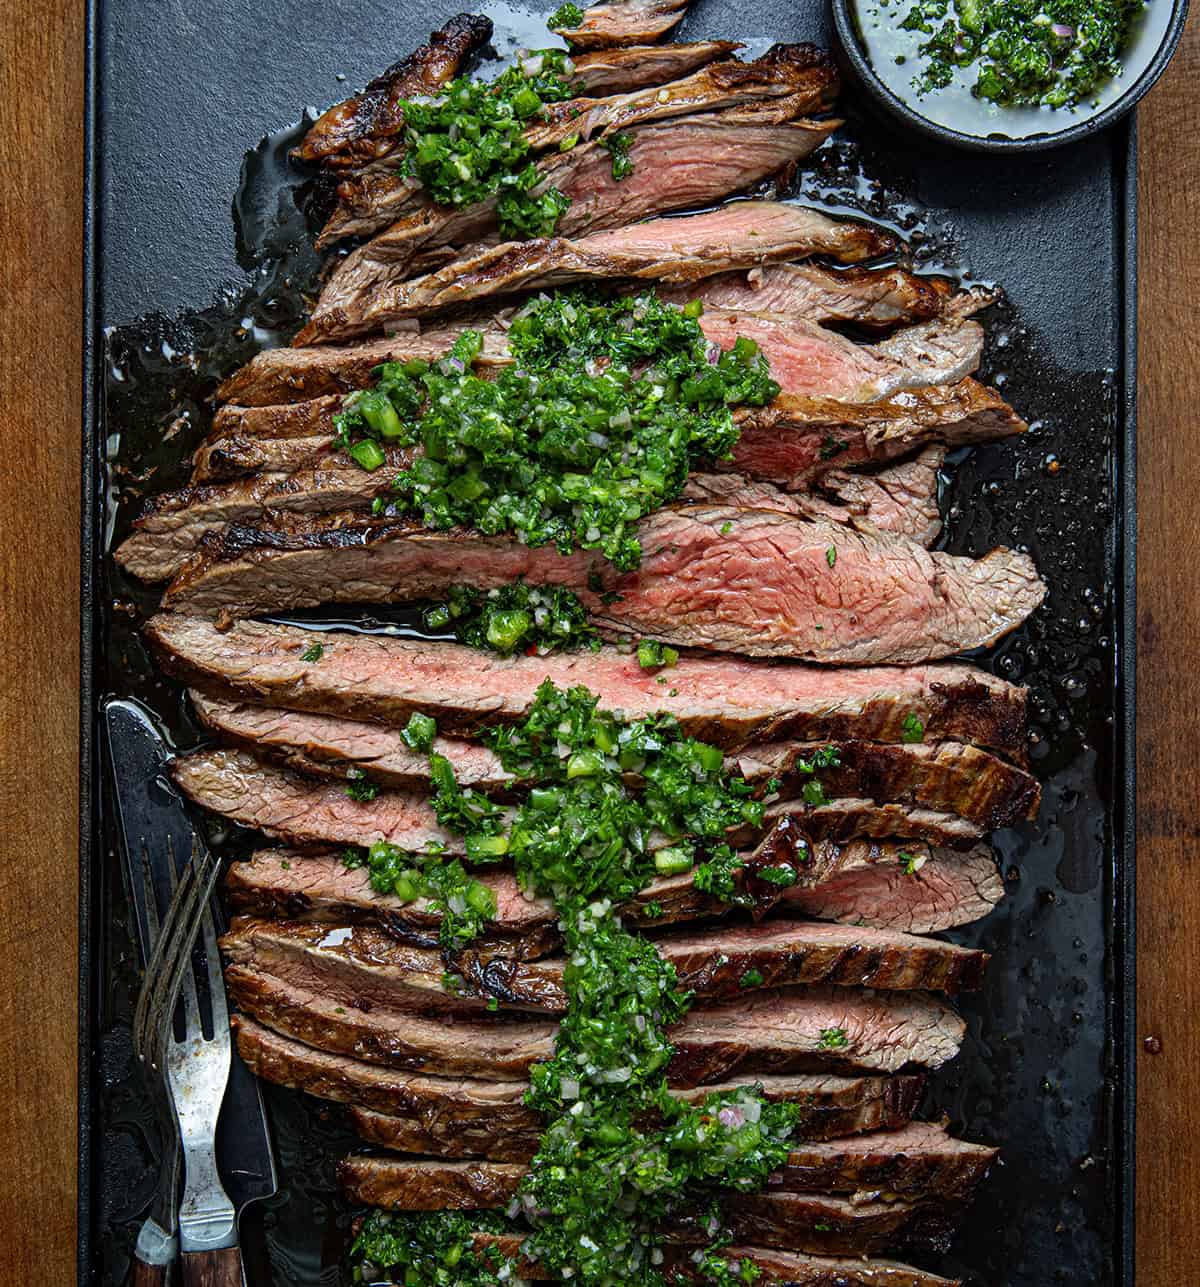 Chimichurri London Broil cut into strips showing tender medium-rare beef covered in chimichurri sauce.